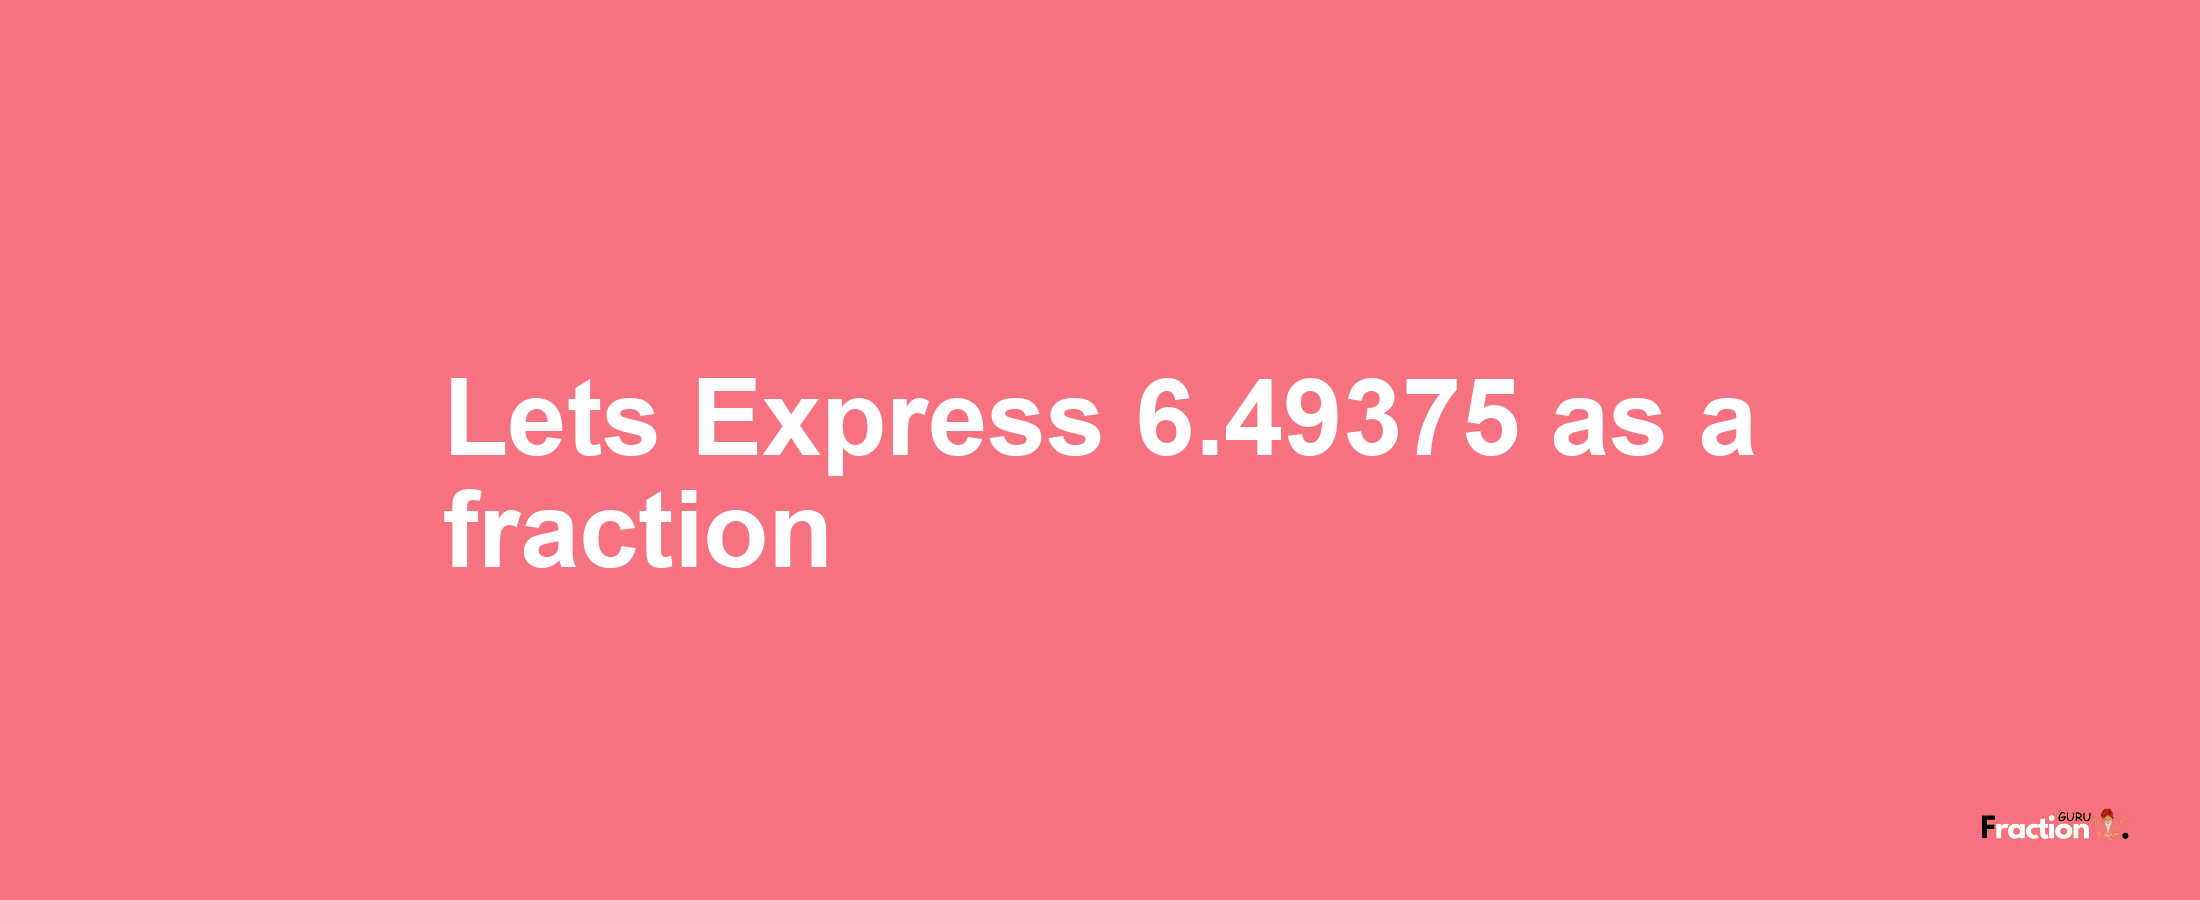 Lets Express 6.49375 as afraction